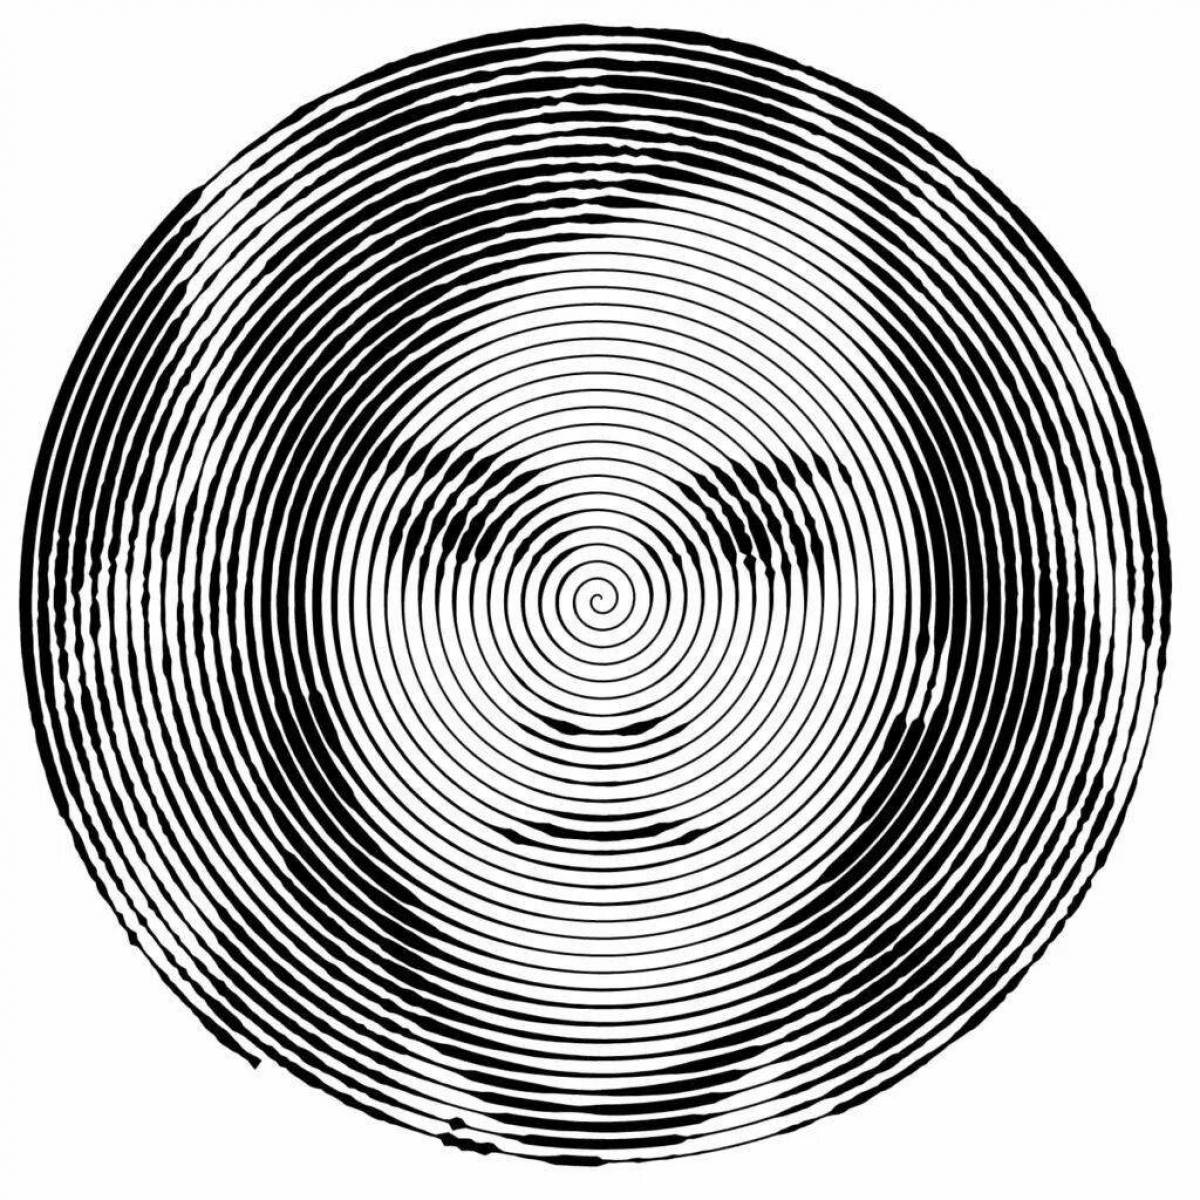 Coloring page mysterious circle with lines